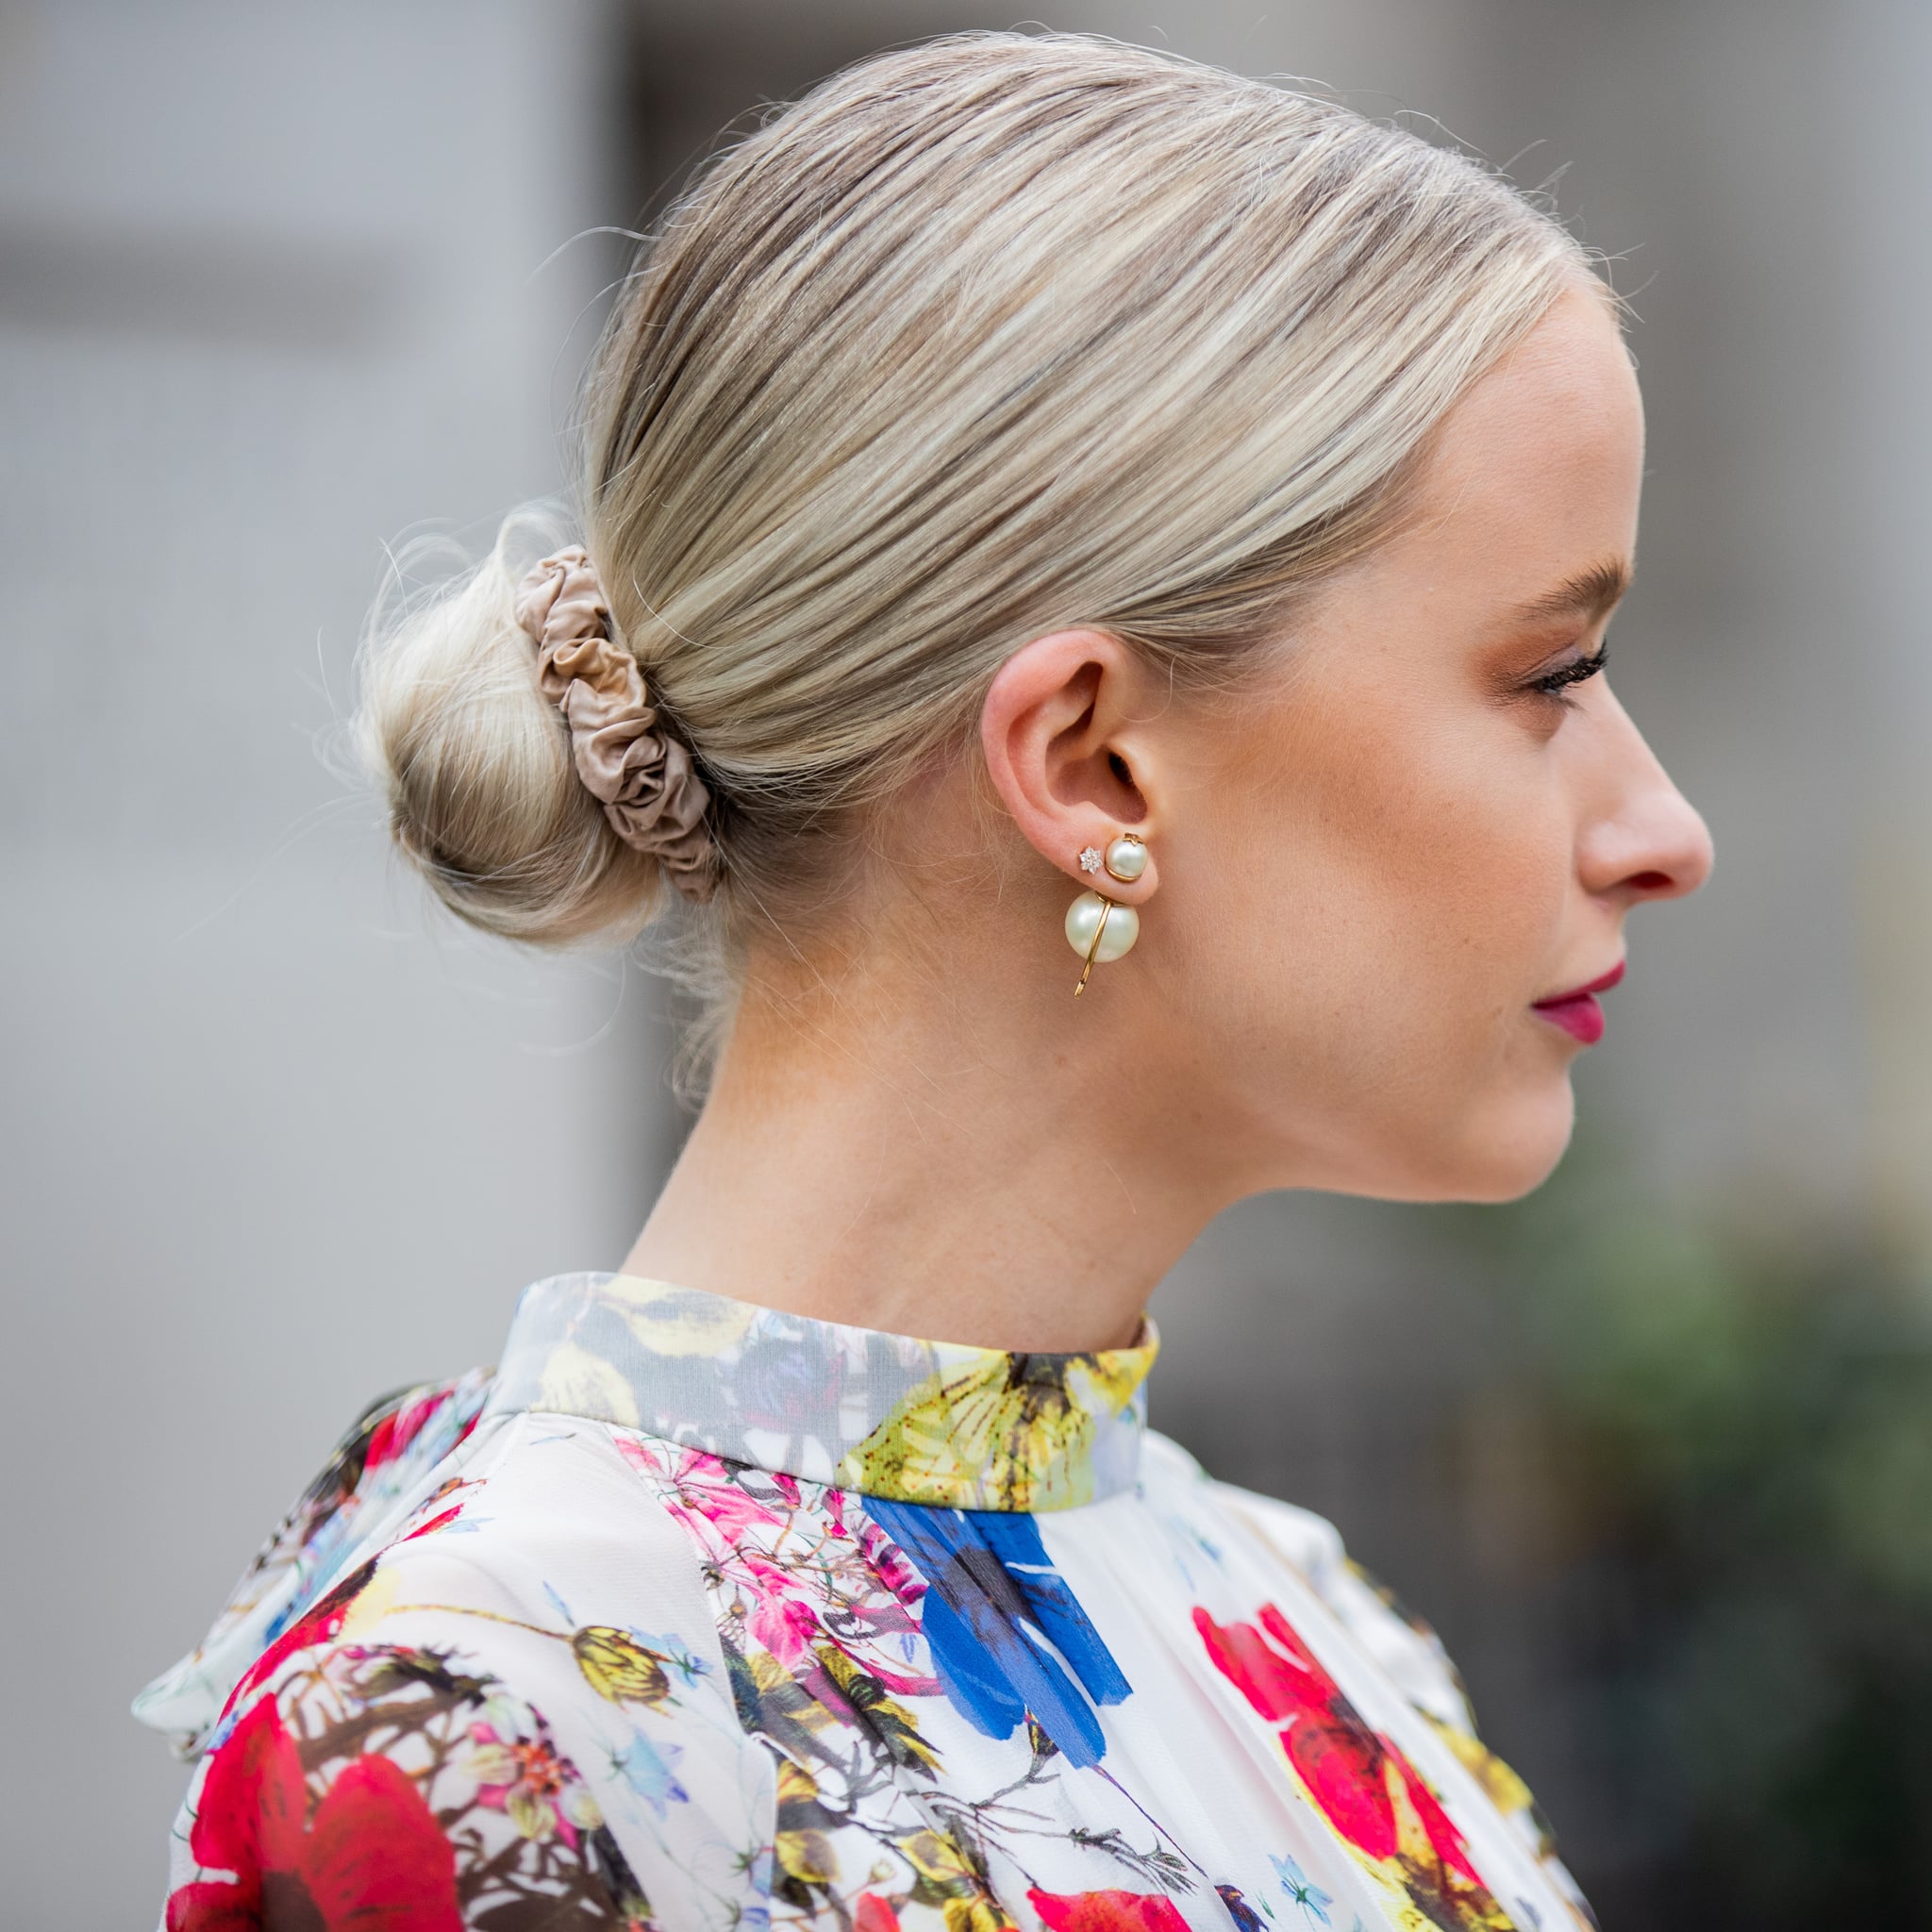 Wet Hair Buns Are the Ultimate Lazy Summer Hairstyle | POPSUGAR Beauty